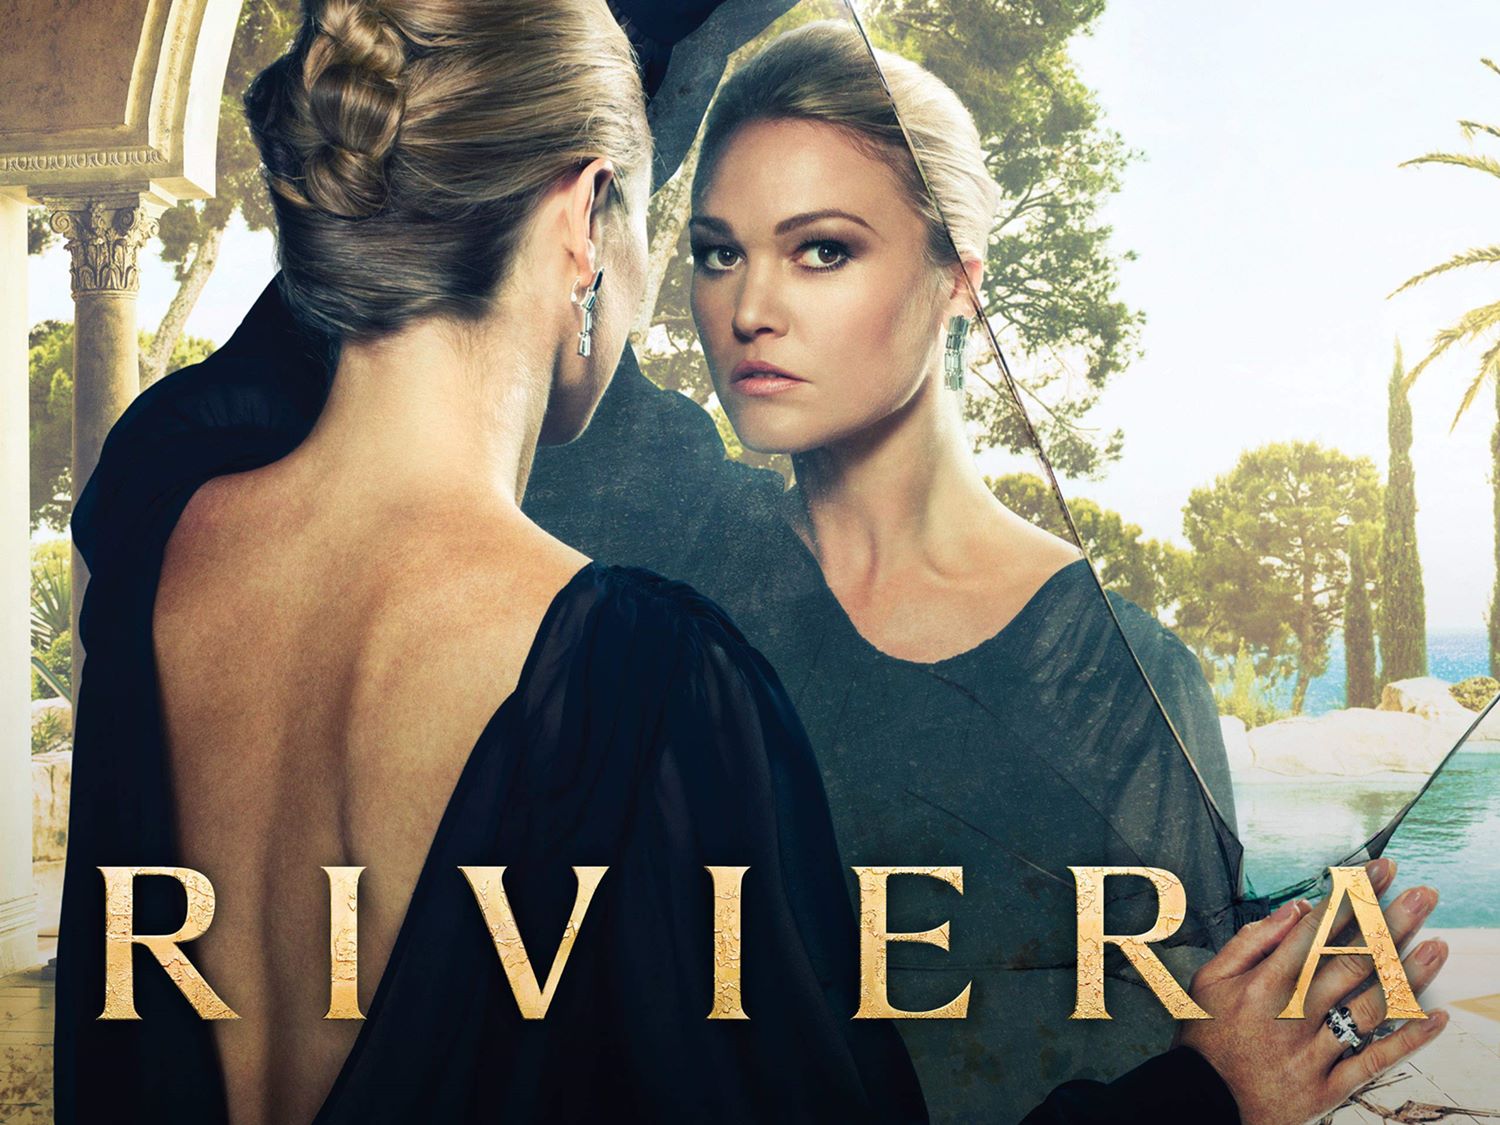 How To Watch Riviera